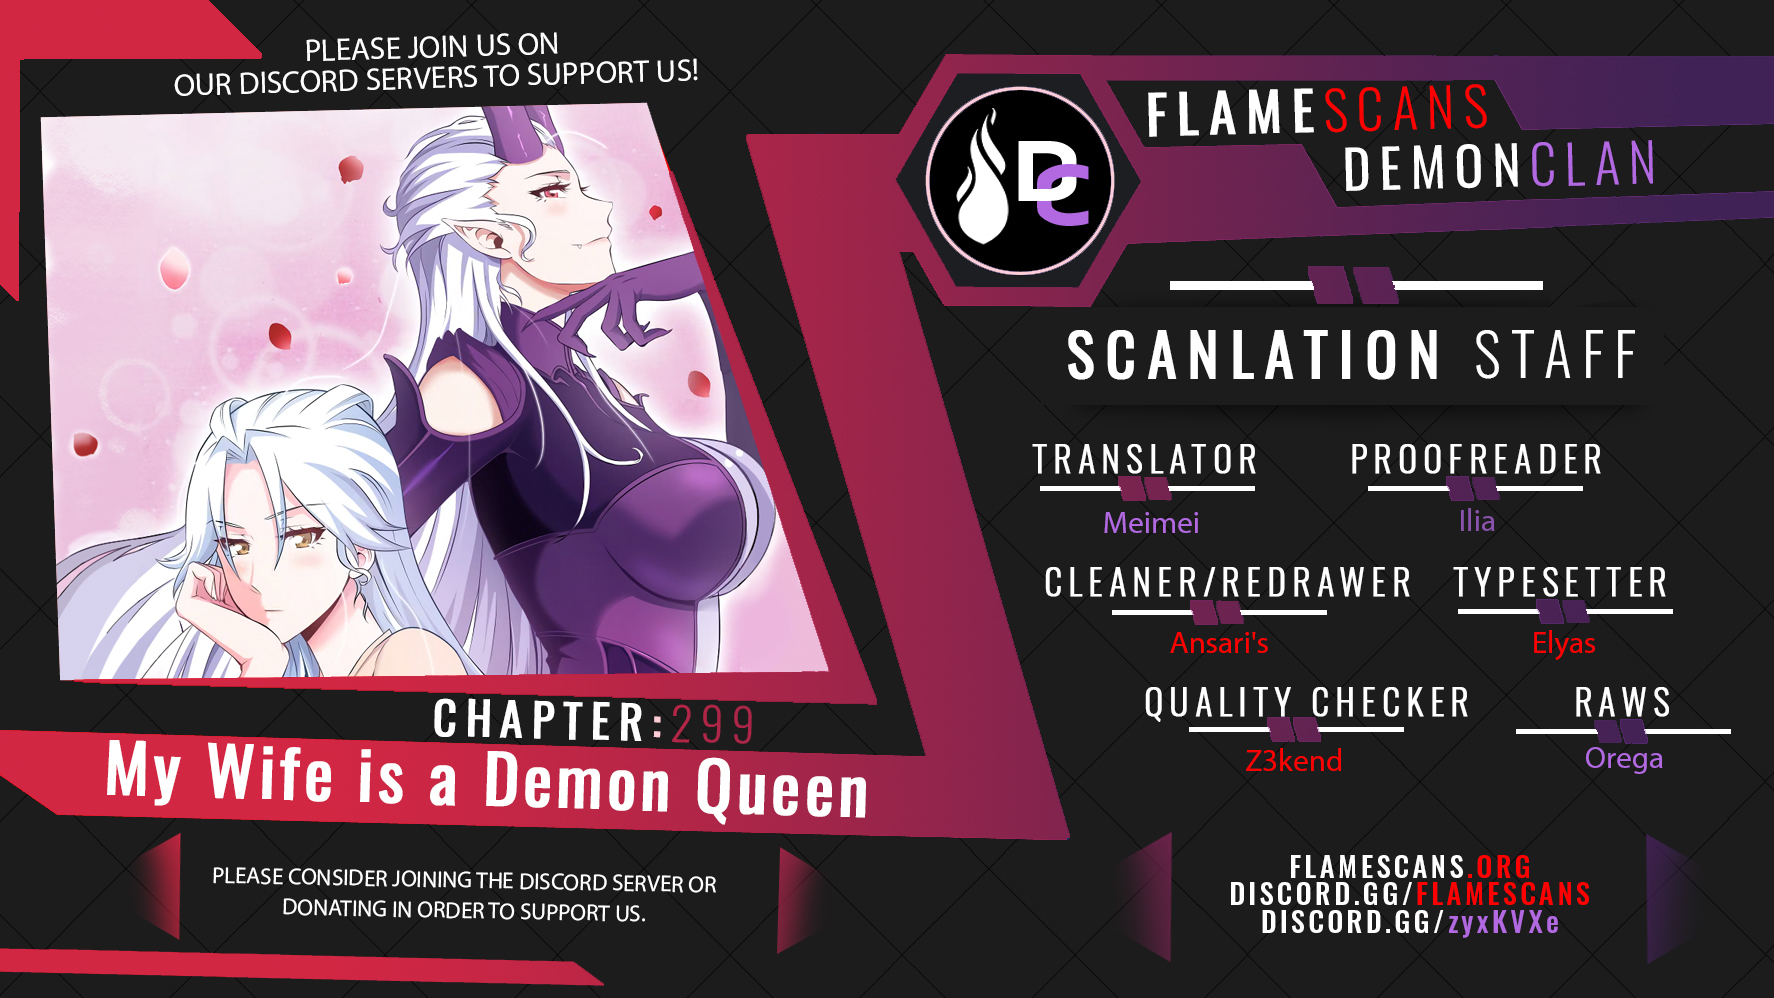 My Wife is a Demon Queen - Chapter 10917 - Image 1